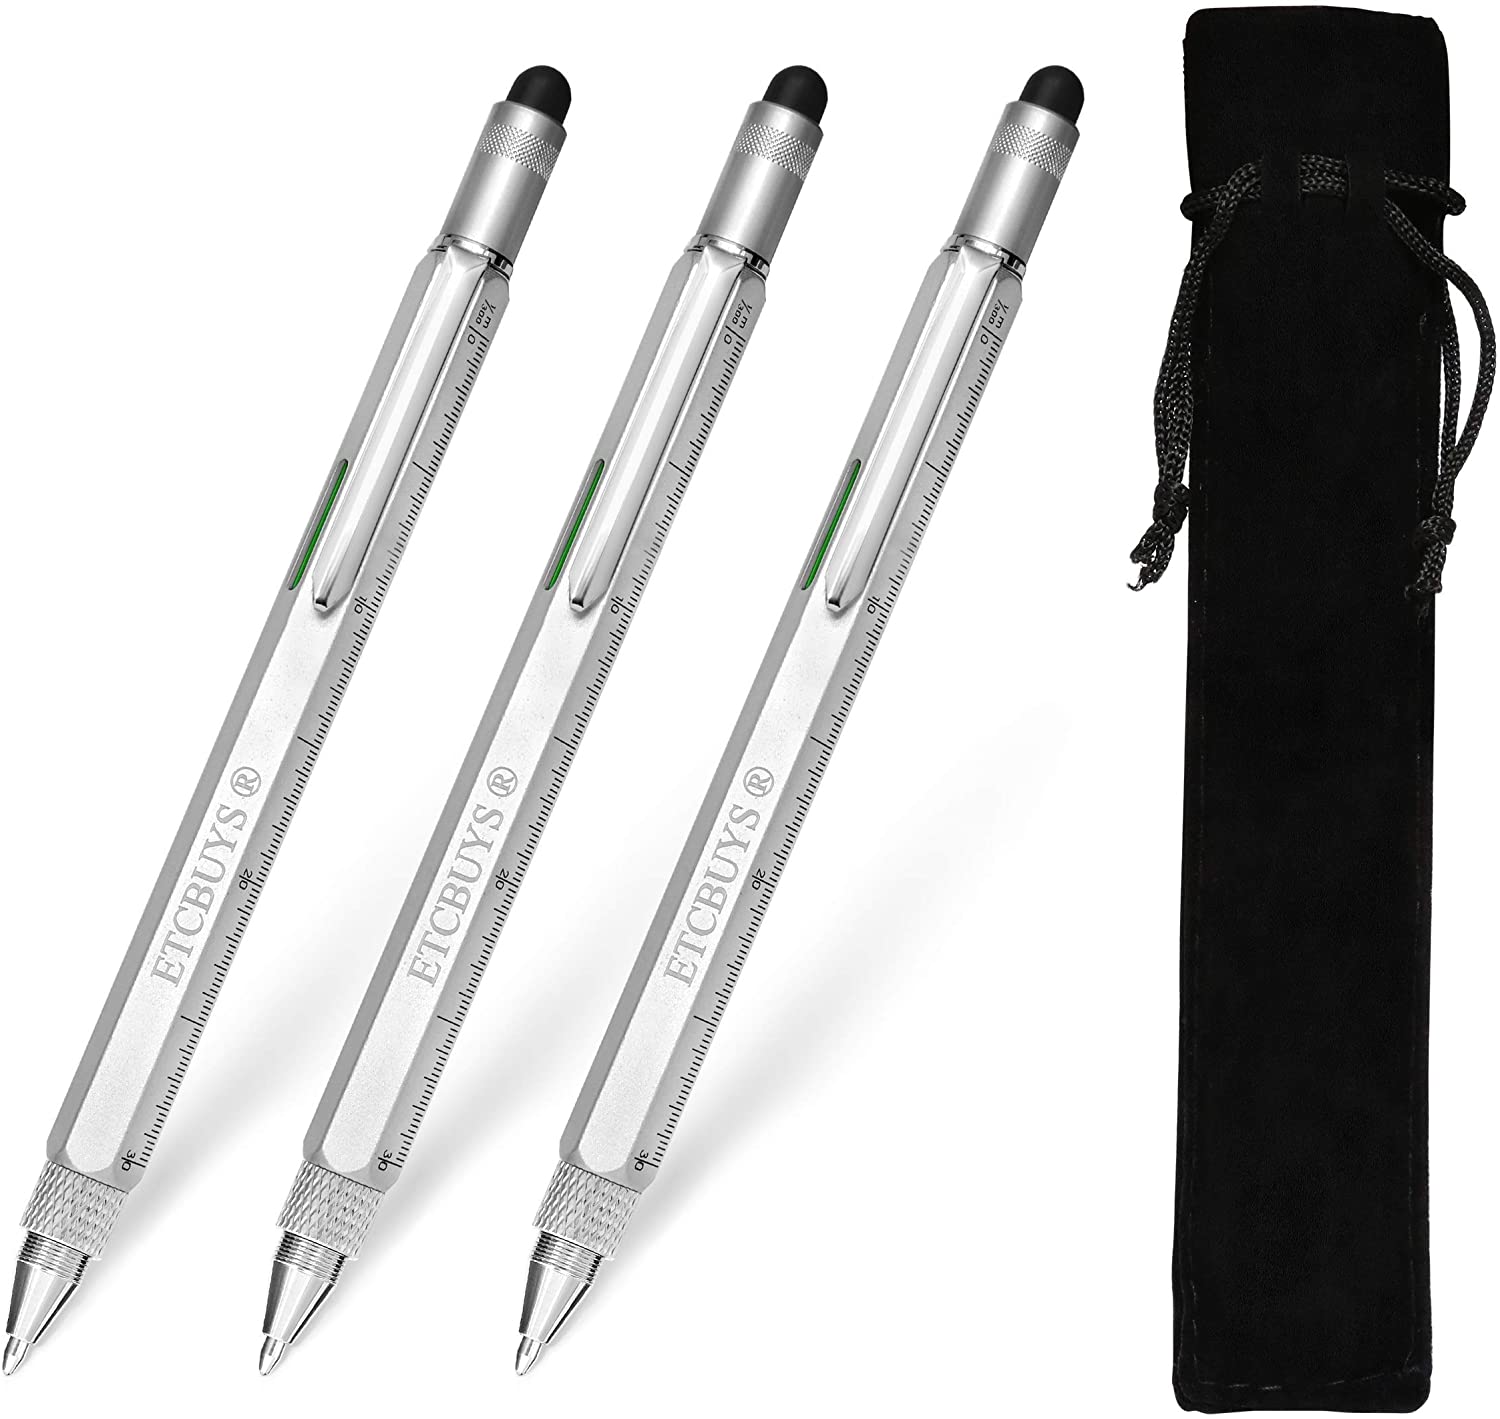 ETCBUYS Screwdriver Pen Pocket Multi Tool 6 in 1 - Silver 3 Pack